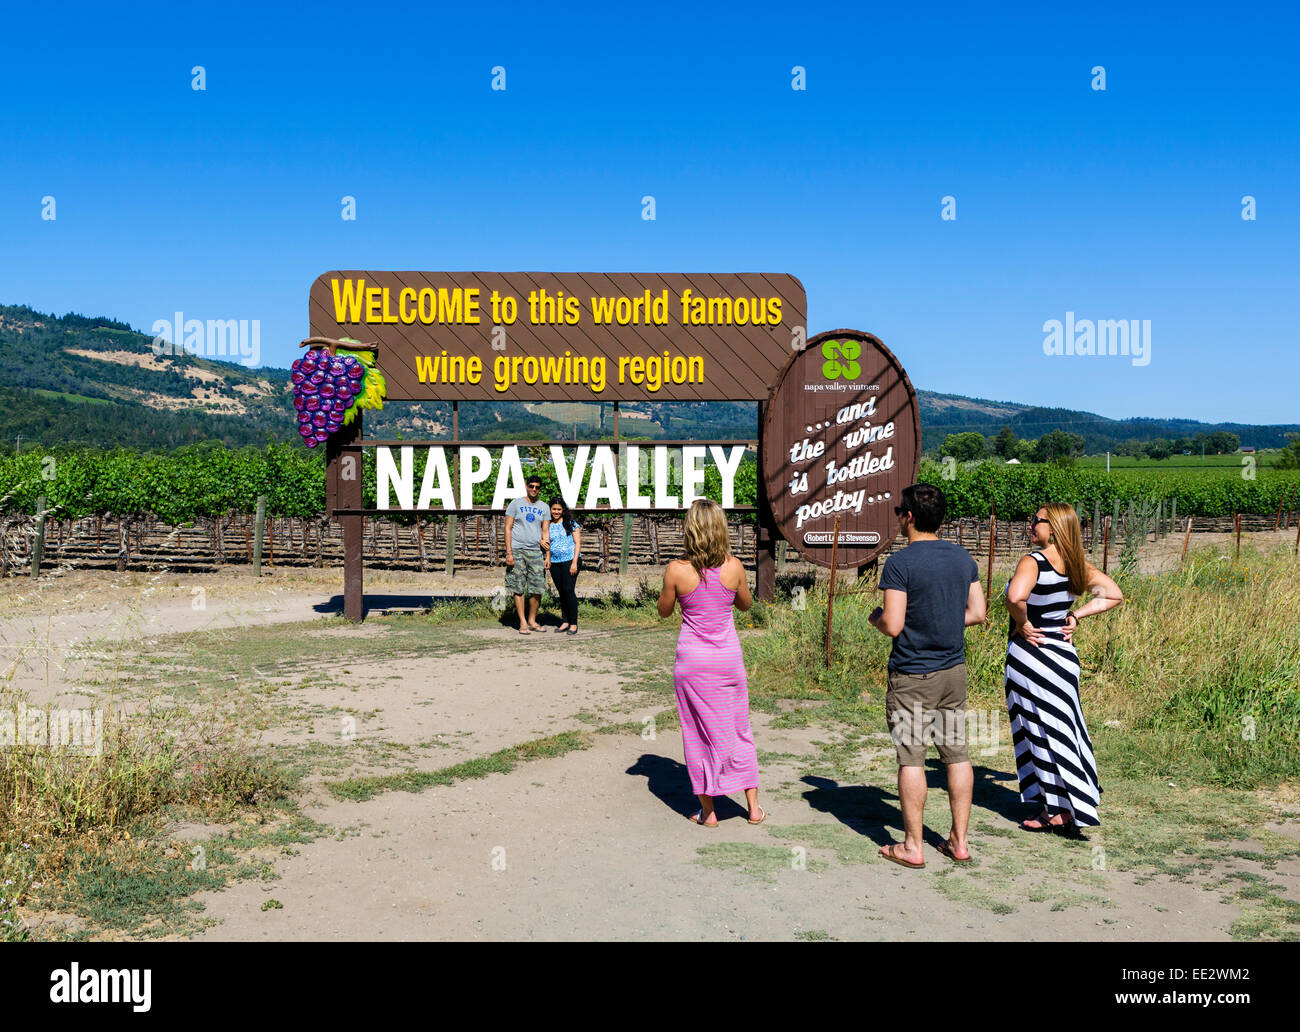 Tourists taking pictures in front of the Welcome sign north of St Helena, Napa Valley, Wine Country, Northern California, USA Stock Photo